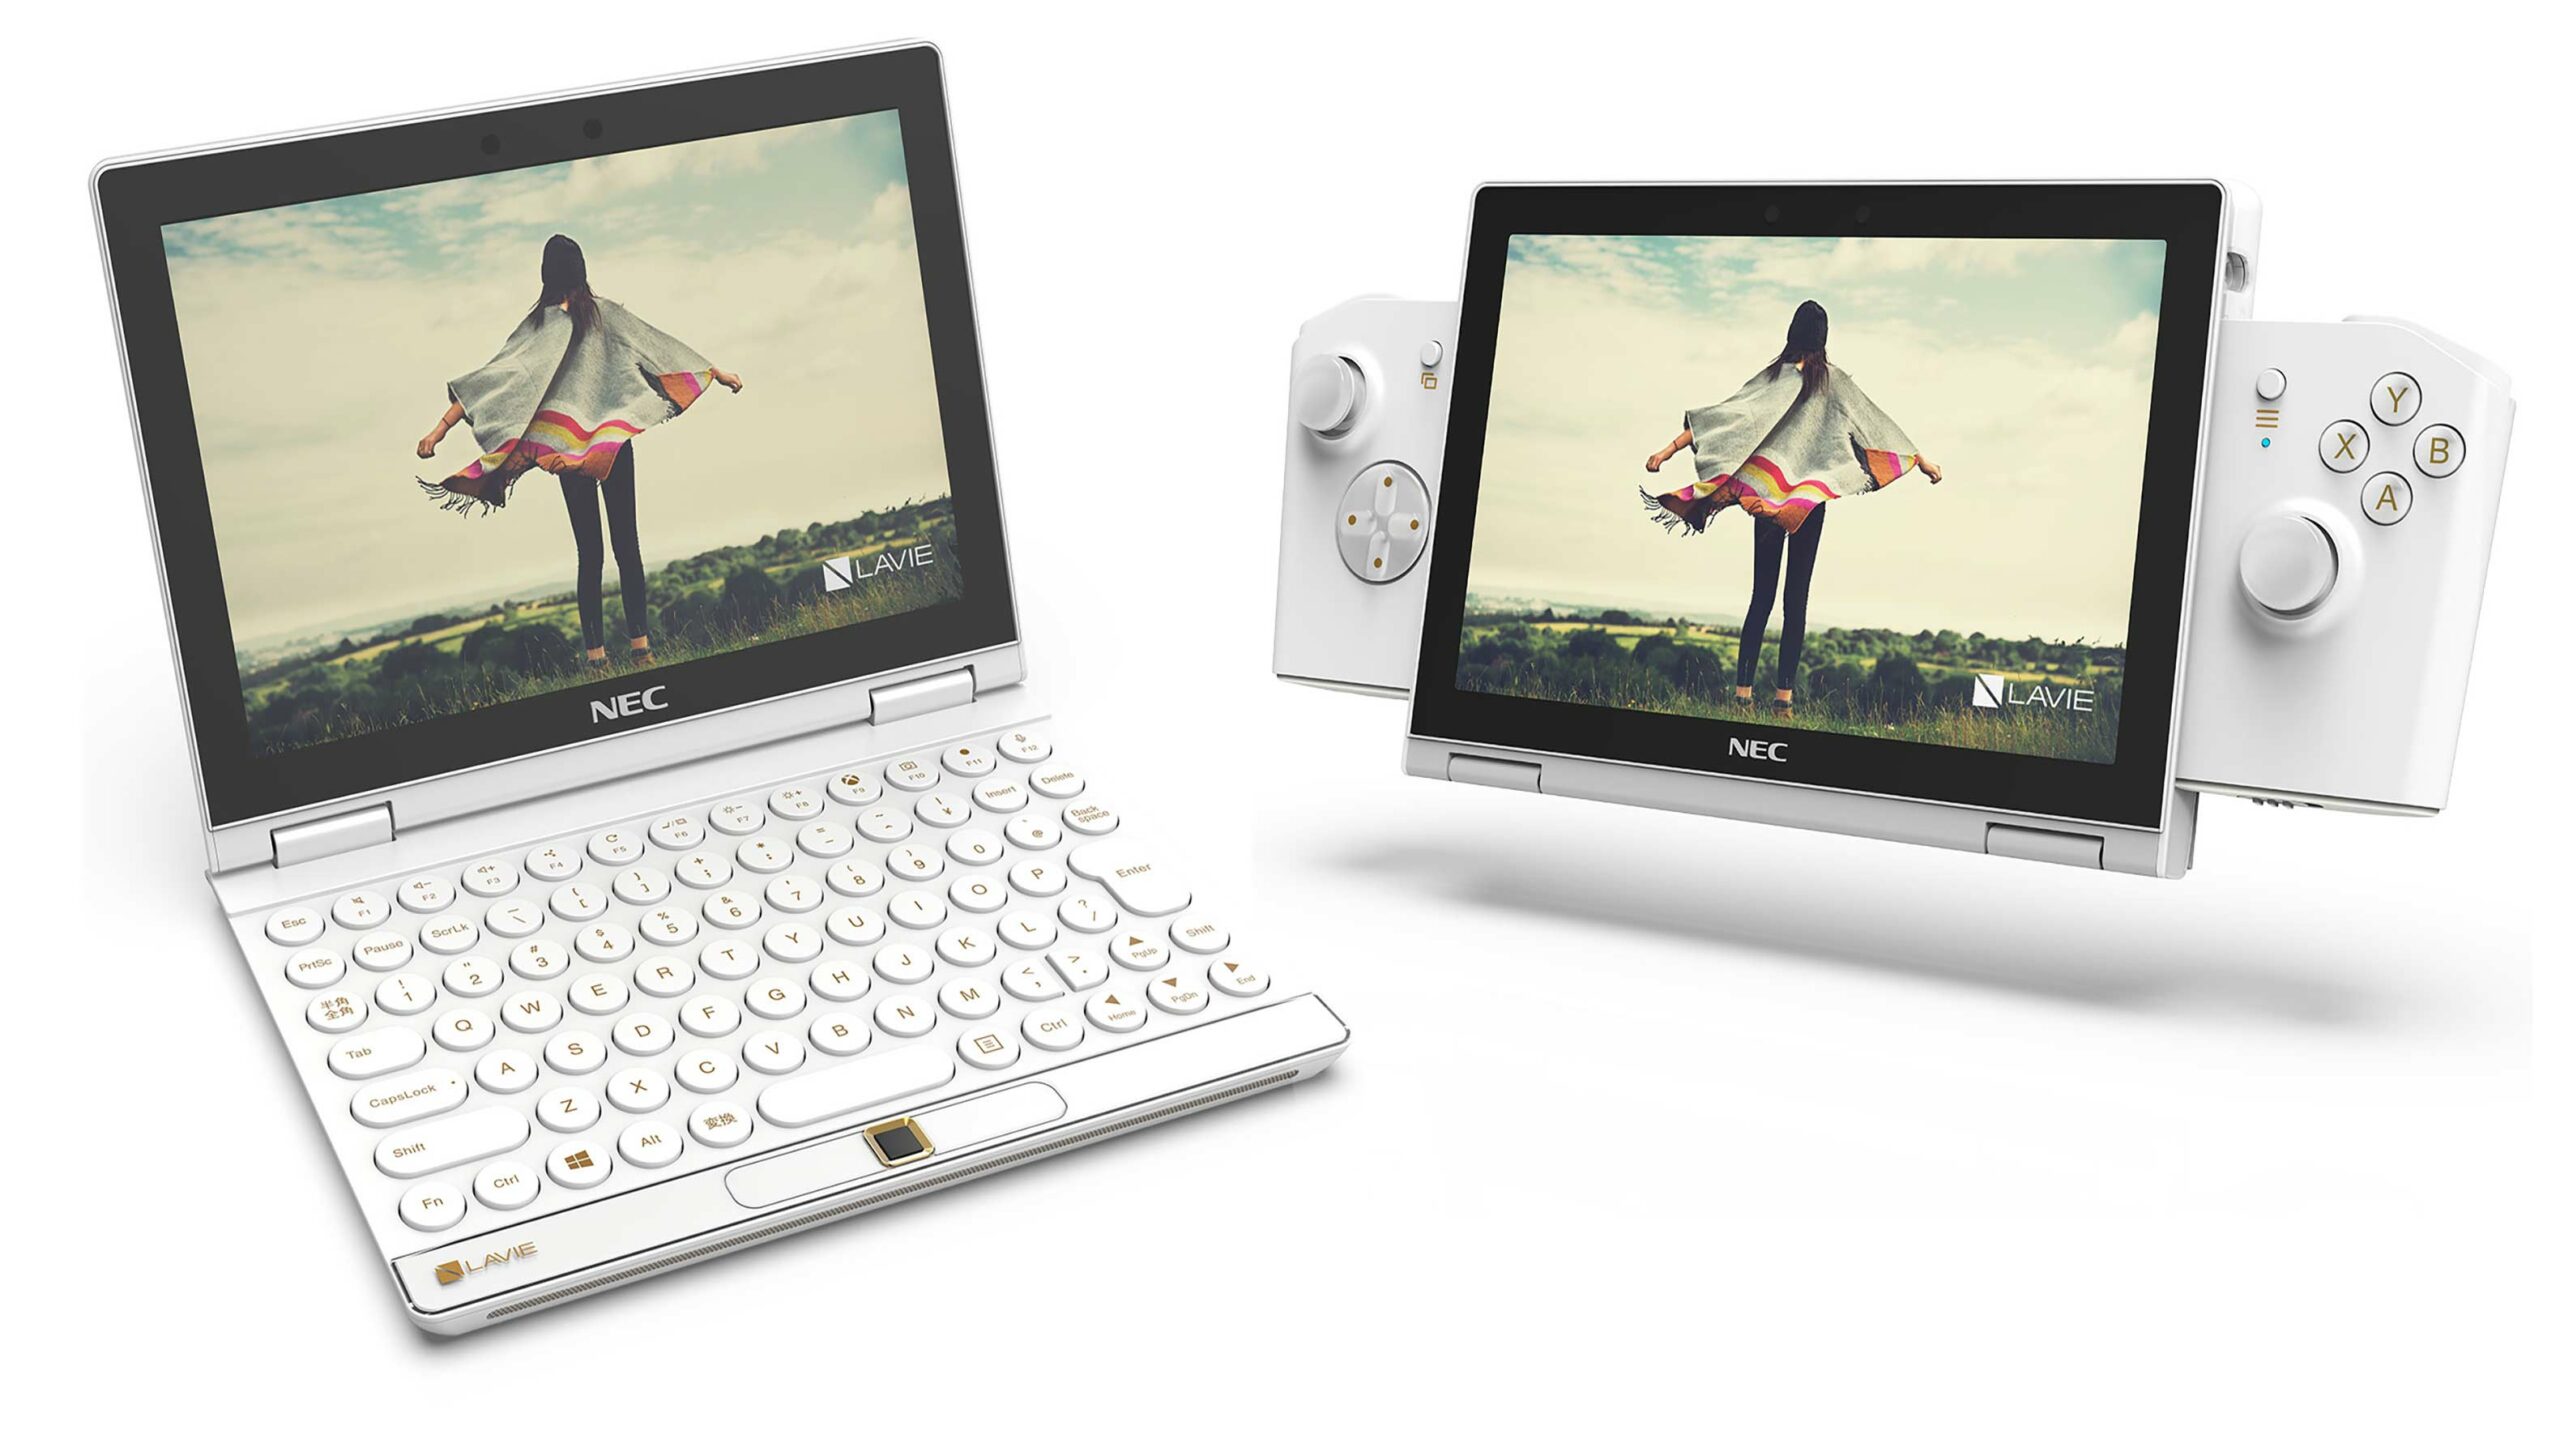 Lavie Mini serves as portable PC or mobile gaming console